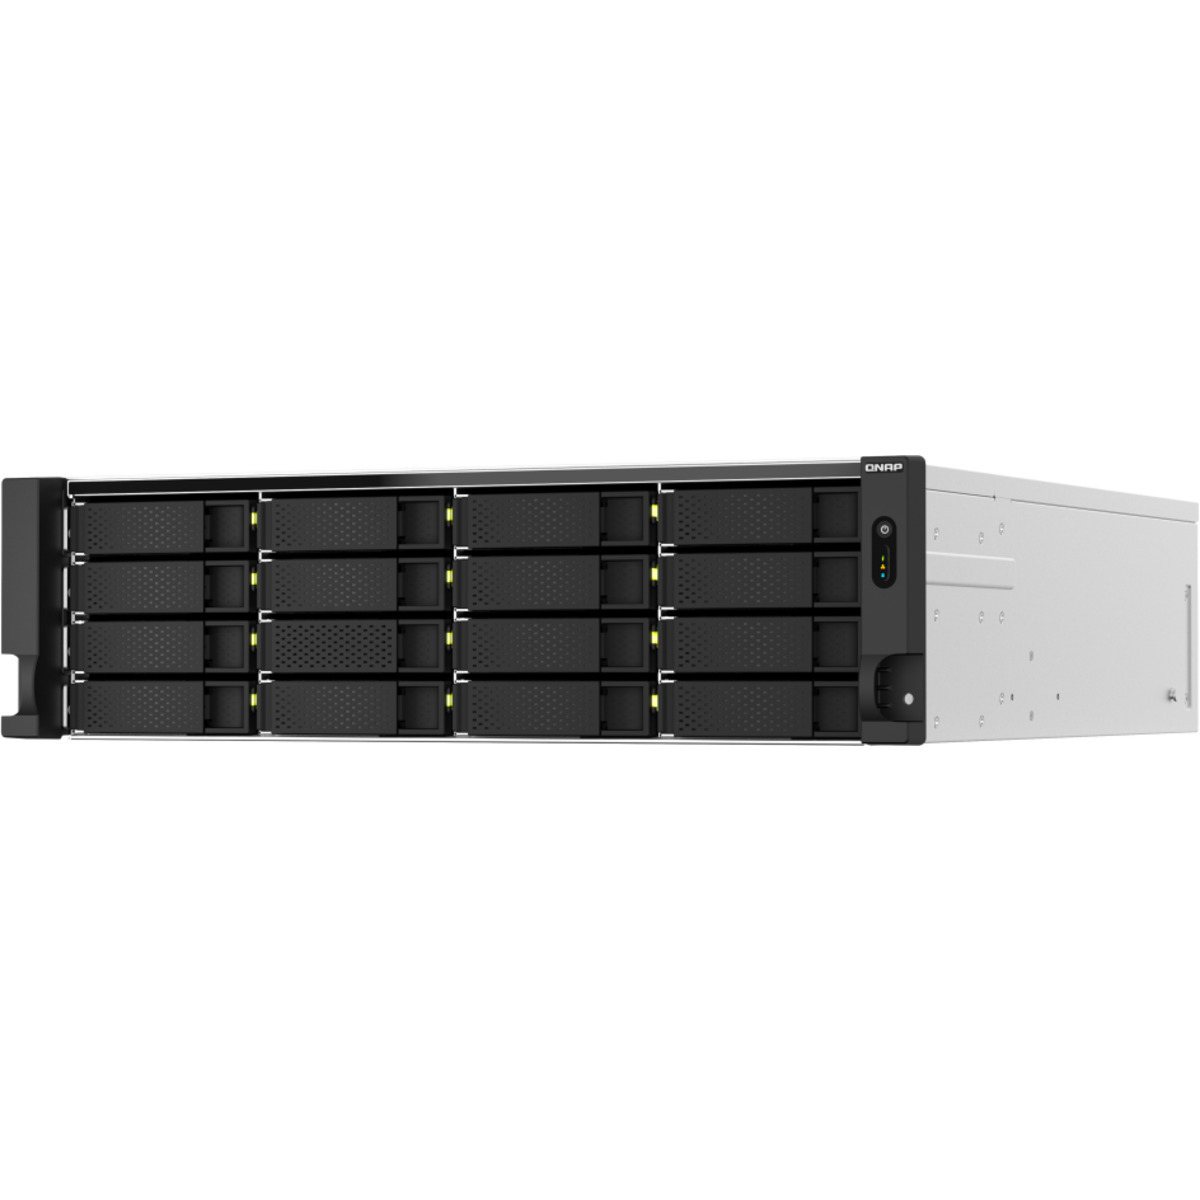 QNAP TS-h2287XU-RP E-2378 QuTS hero Edition 48tb 16+6-Bay RackMount Large Business / Enterprise NAS - Network Attached Storage Device 12x4tb Western Digital Ultrastar DC HC310 HUS726T4TALE6L4 3.5 7200rpm SATA 6Gb/s HDD ENTERPRISE Class Drives Installed - Burn-In Tested TS-h2287XU-RP E-2378 QuTS hero Edition